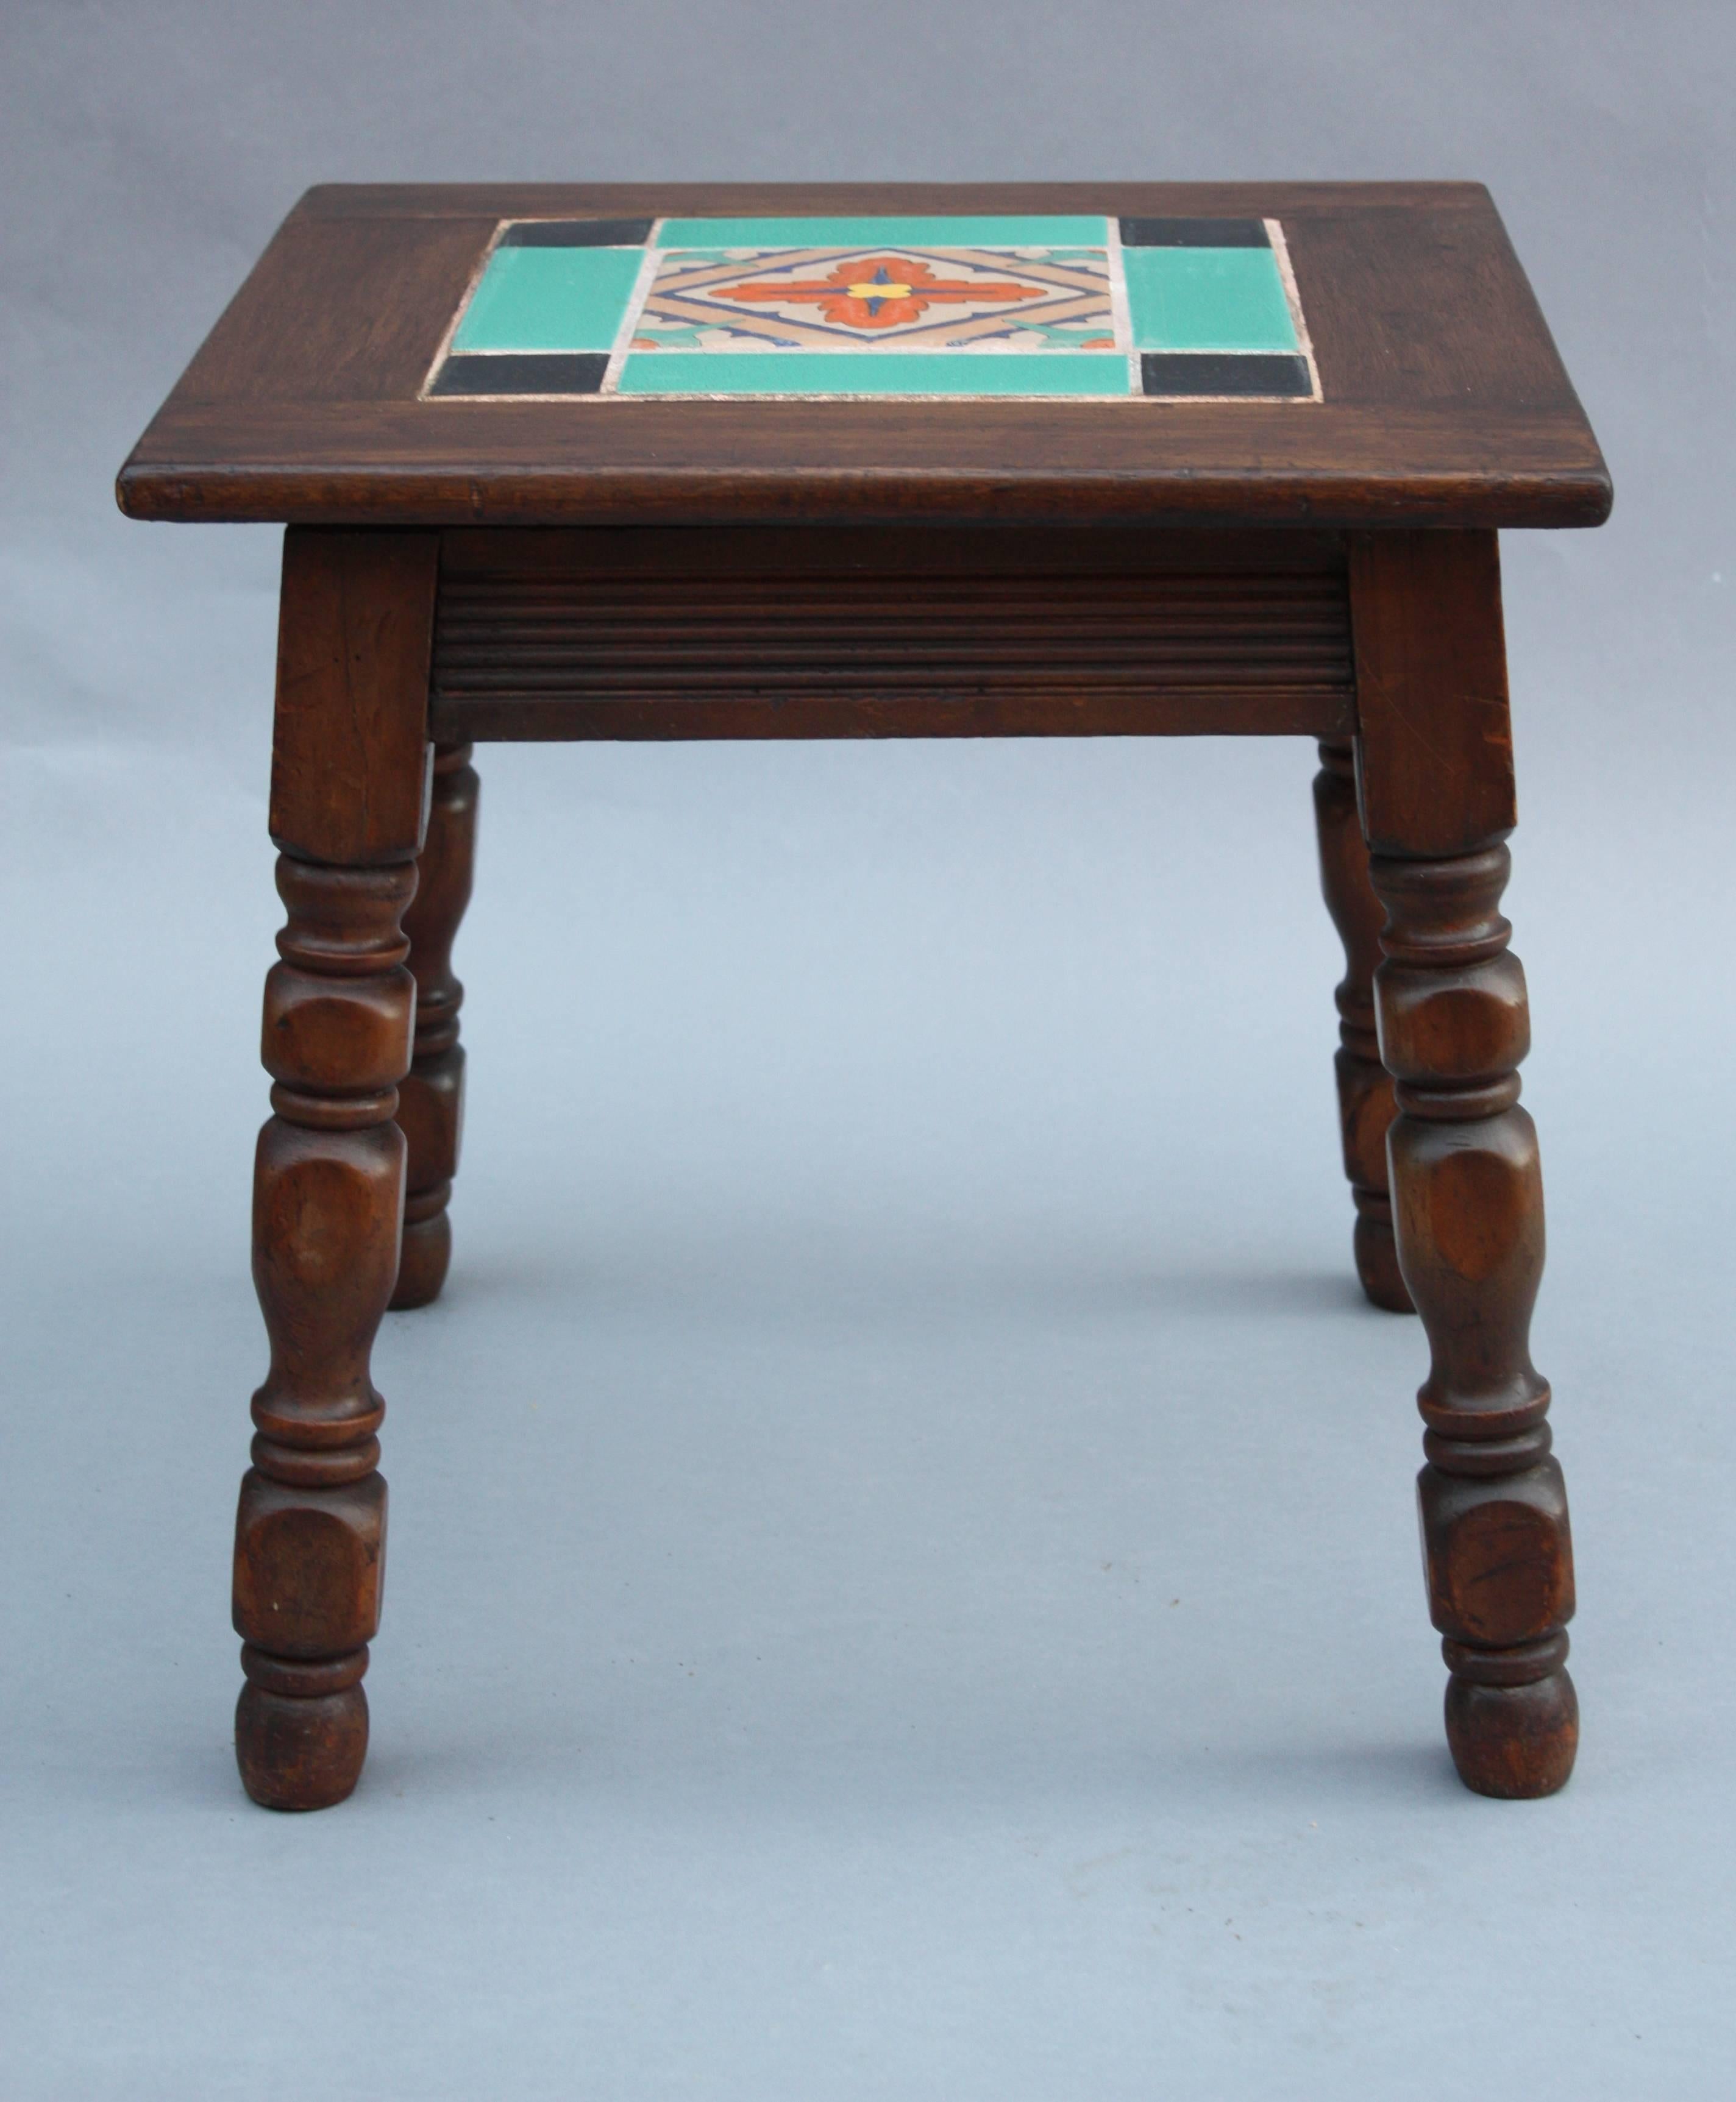 American 1920s Walnut Table with Inlaid California Tile